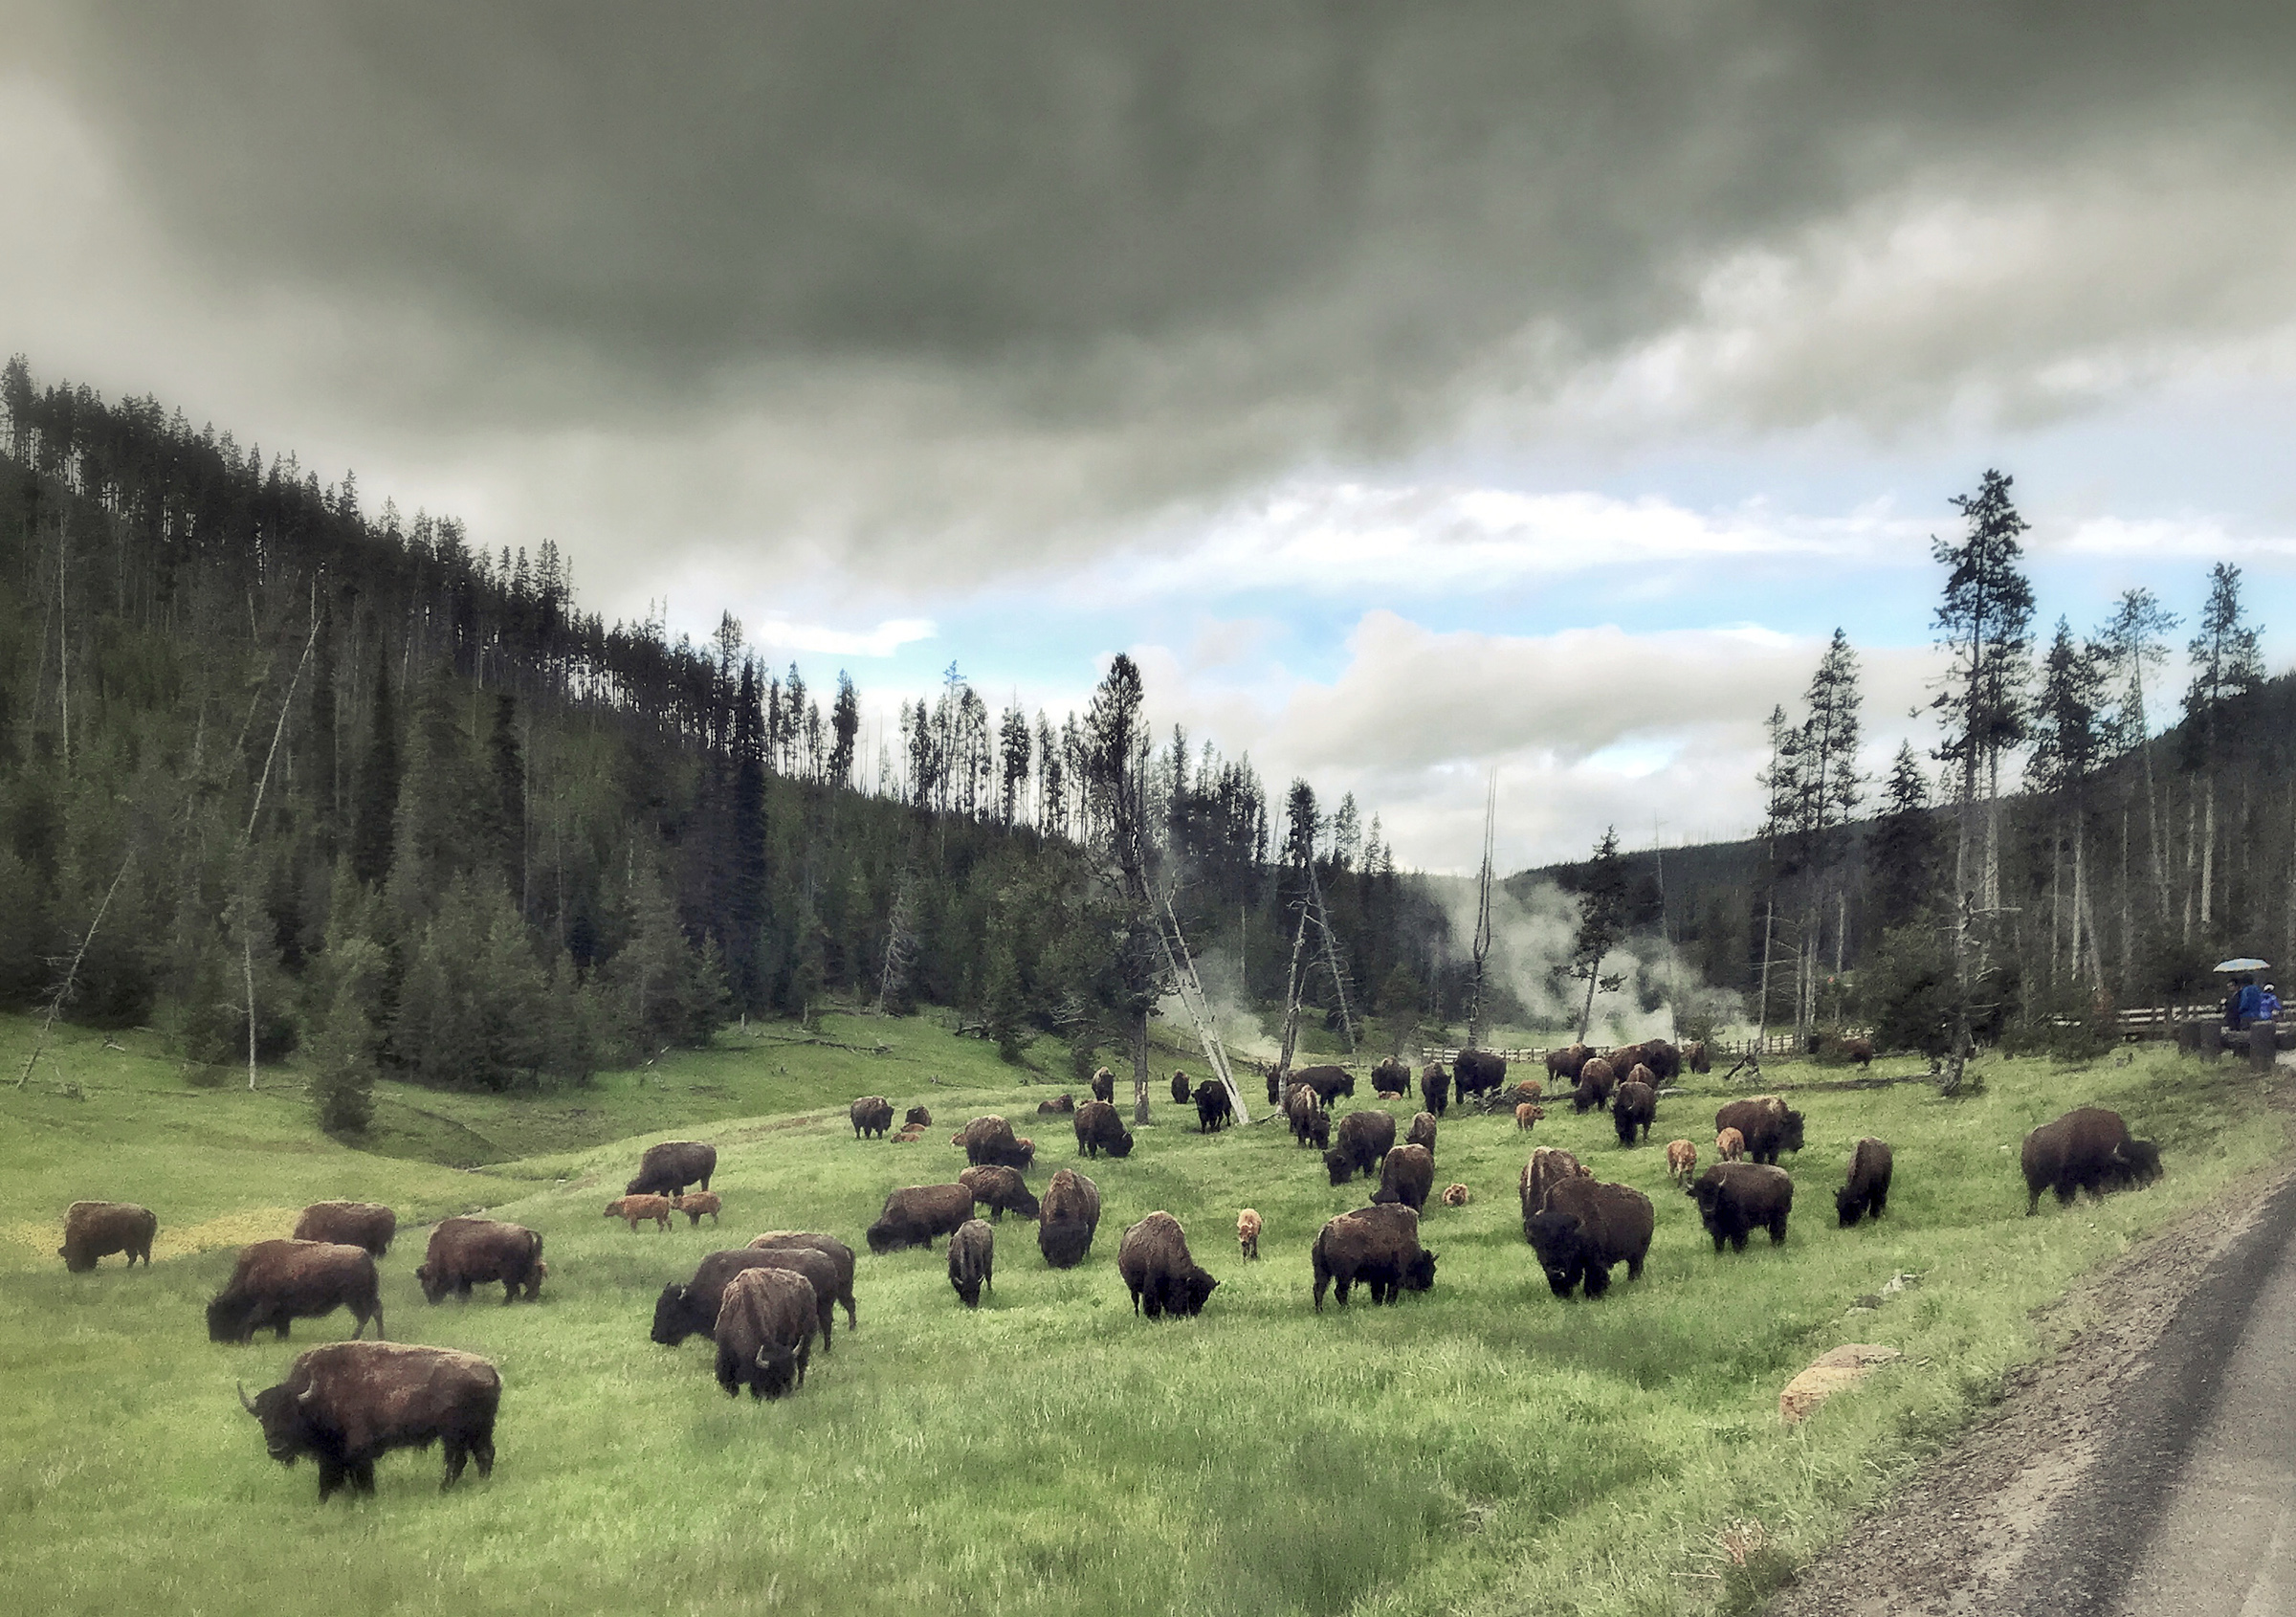 Bisons grazing near Devils Den in Yellowstone National Park in Wyoming, on July 5, 2018. (Soeren Stache—picture-alliance/dpa/AP)